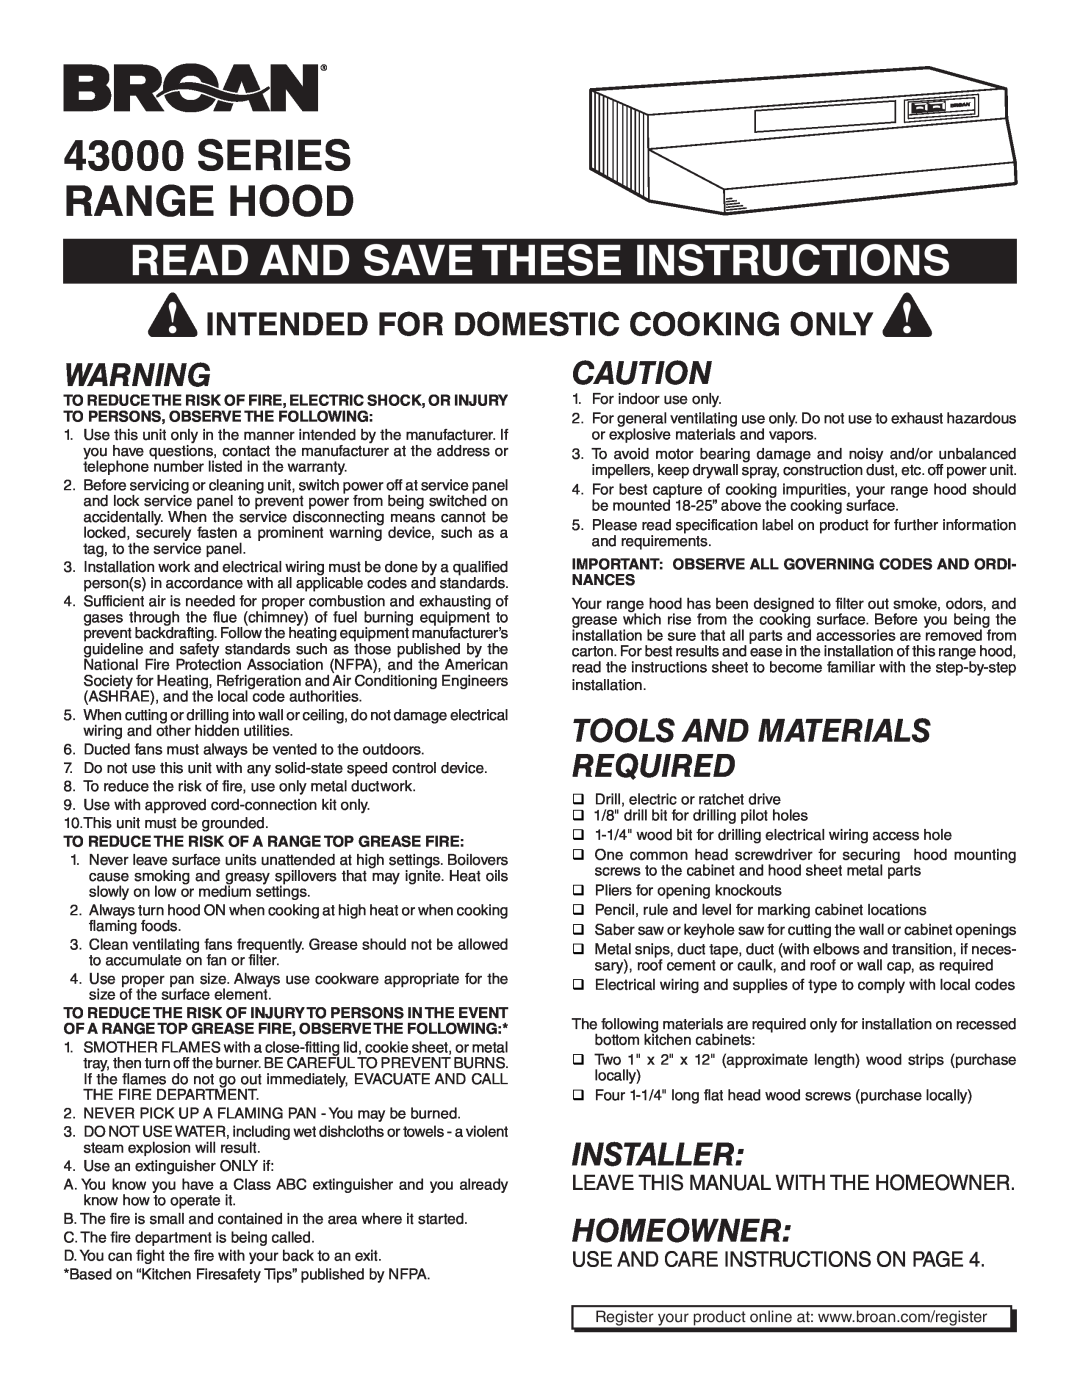 Broan 433023 warranty Series Range Hood, Read And Save These Instructions, Intended For Domestic Cooking Only, Installer 